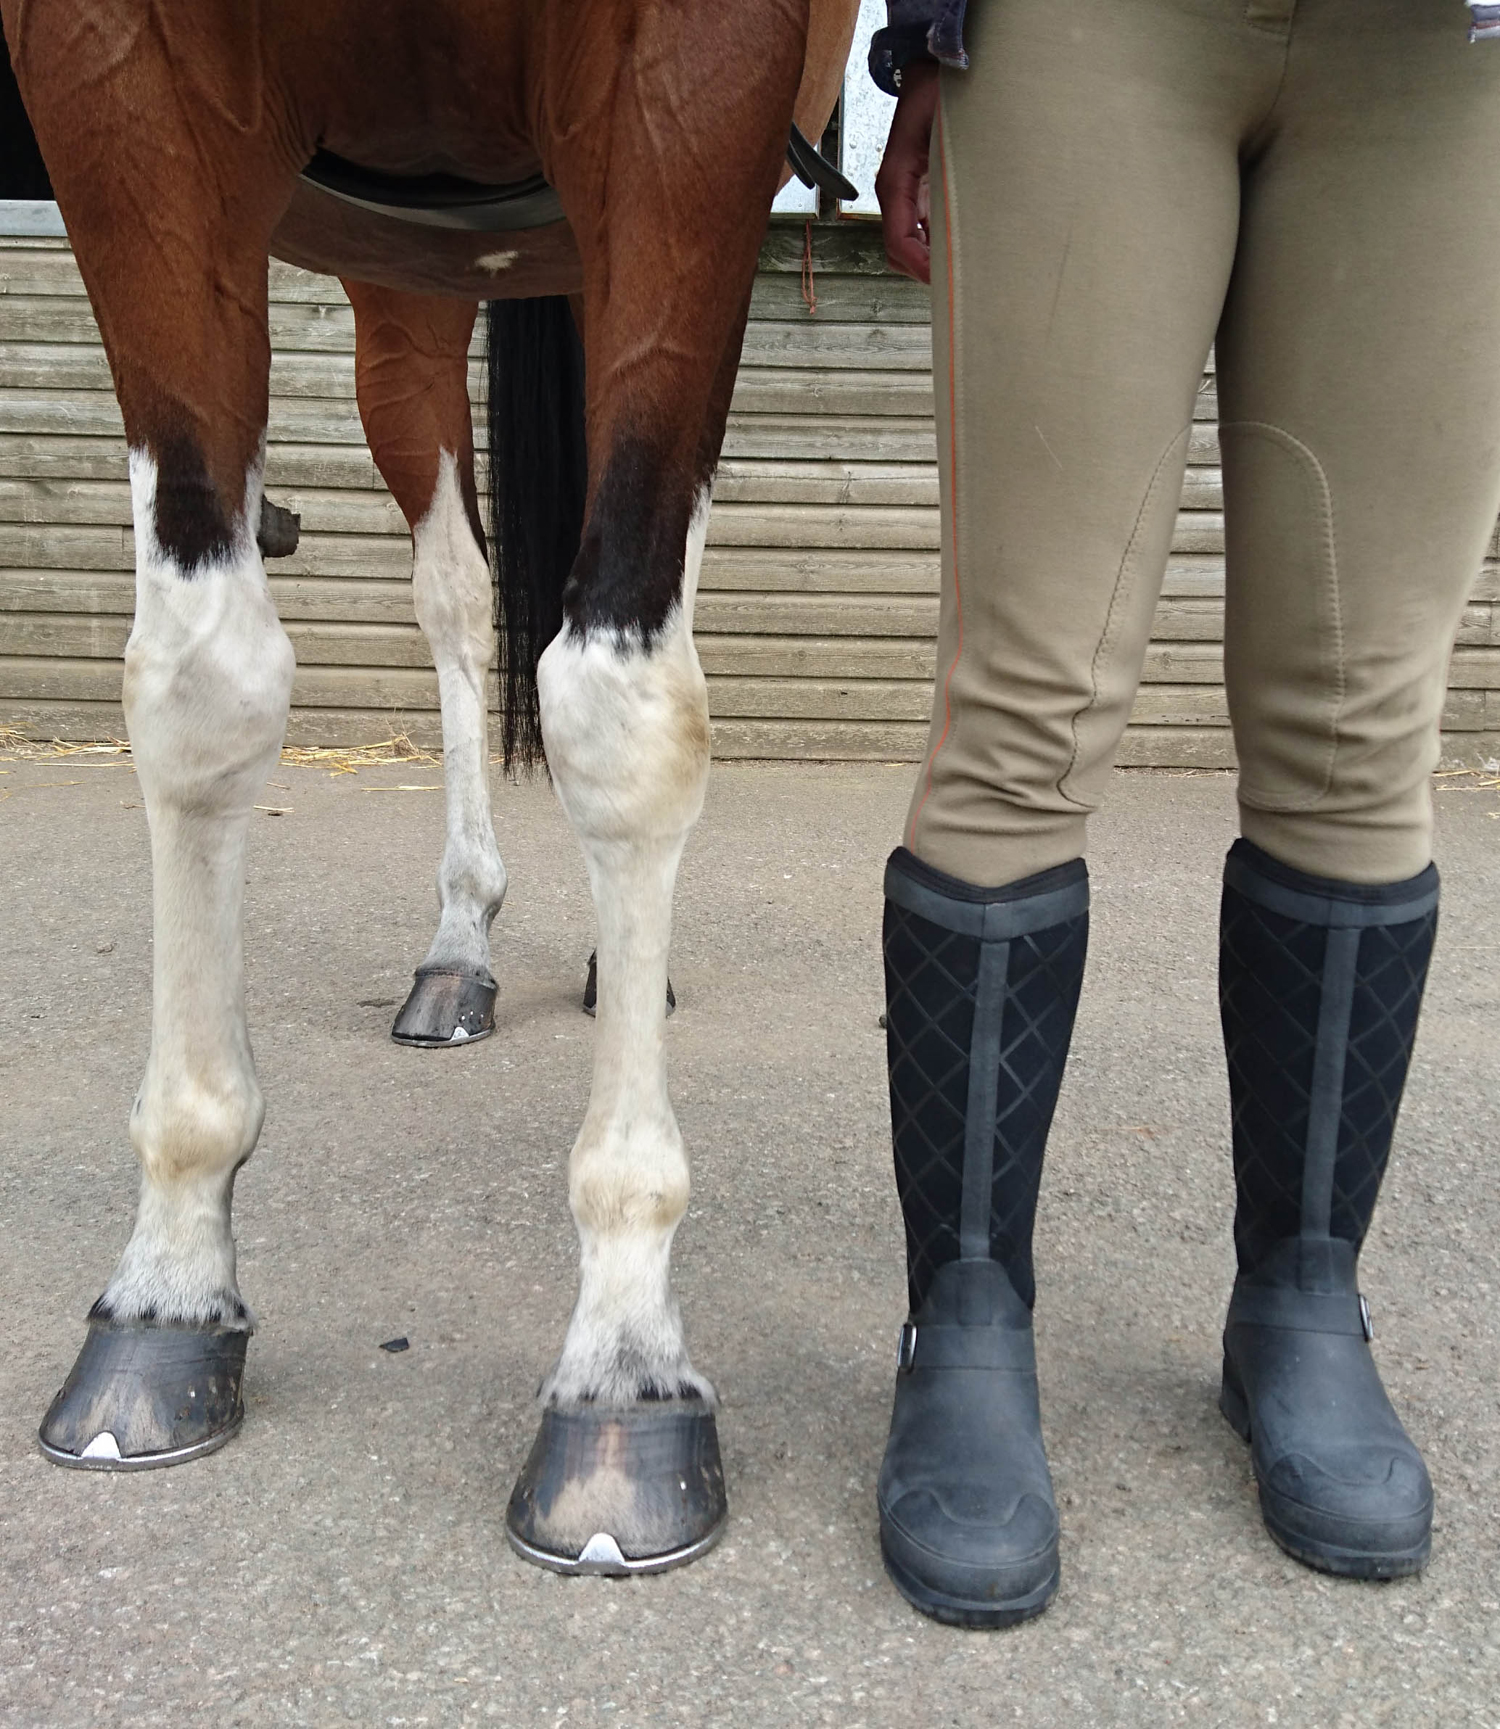 Pacy II Riding Boots from The Original Muck Boot Company - Review